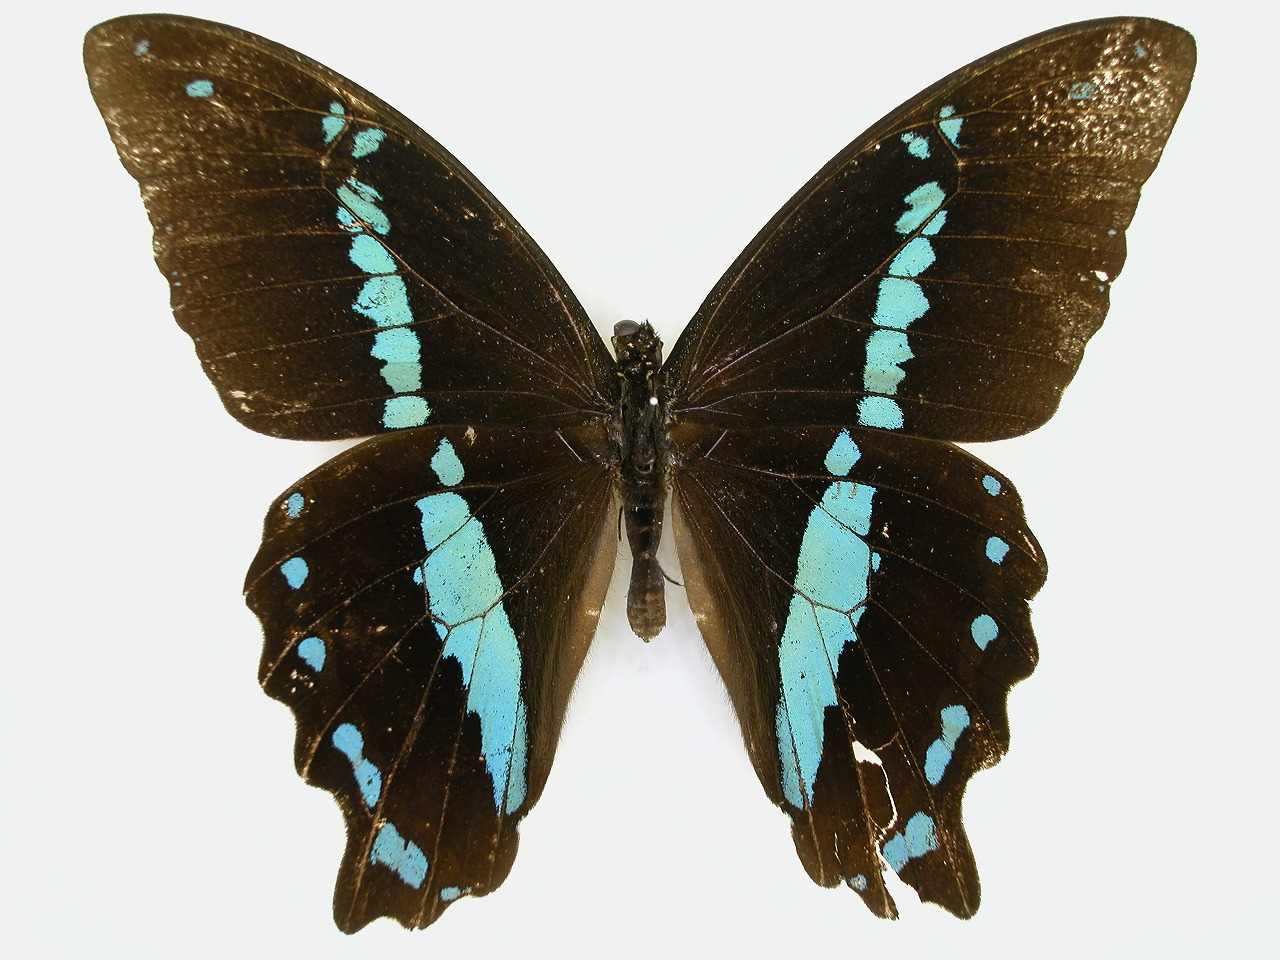 https://www.hitohaku.jp/material/l-material/butterfly-wing/1-papilionidae/B1-269760_A.jpg